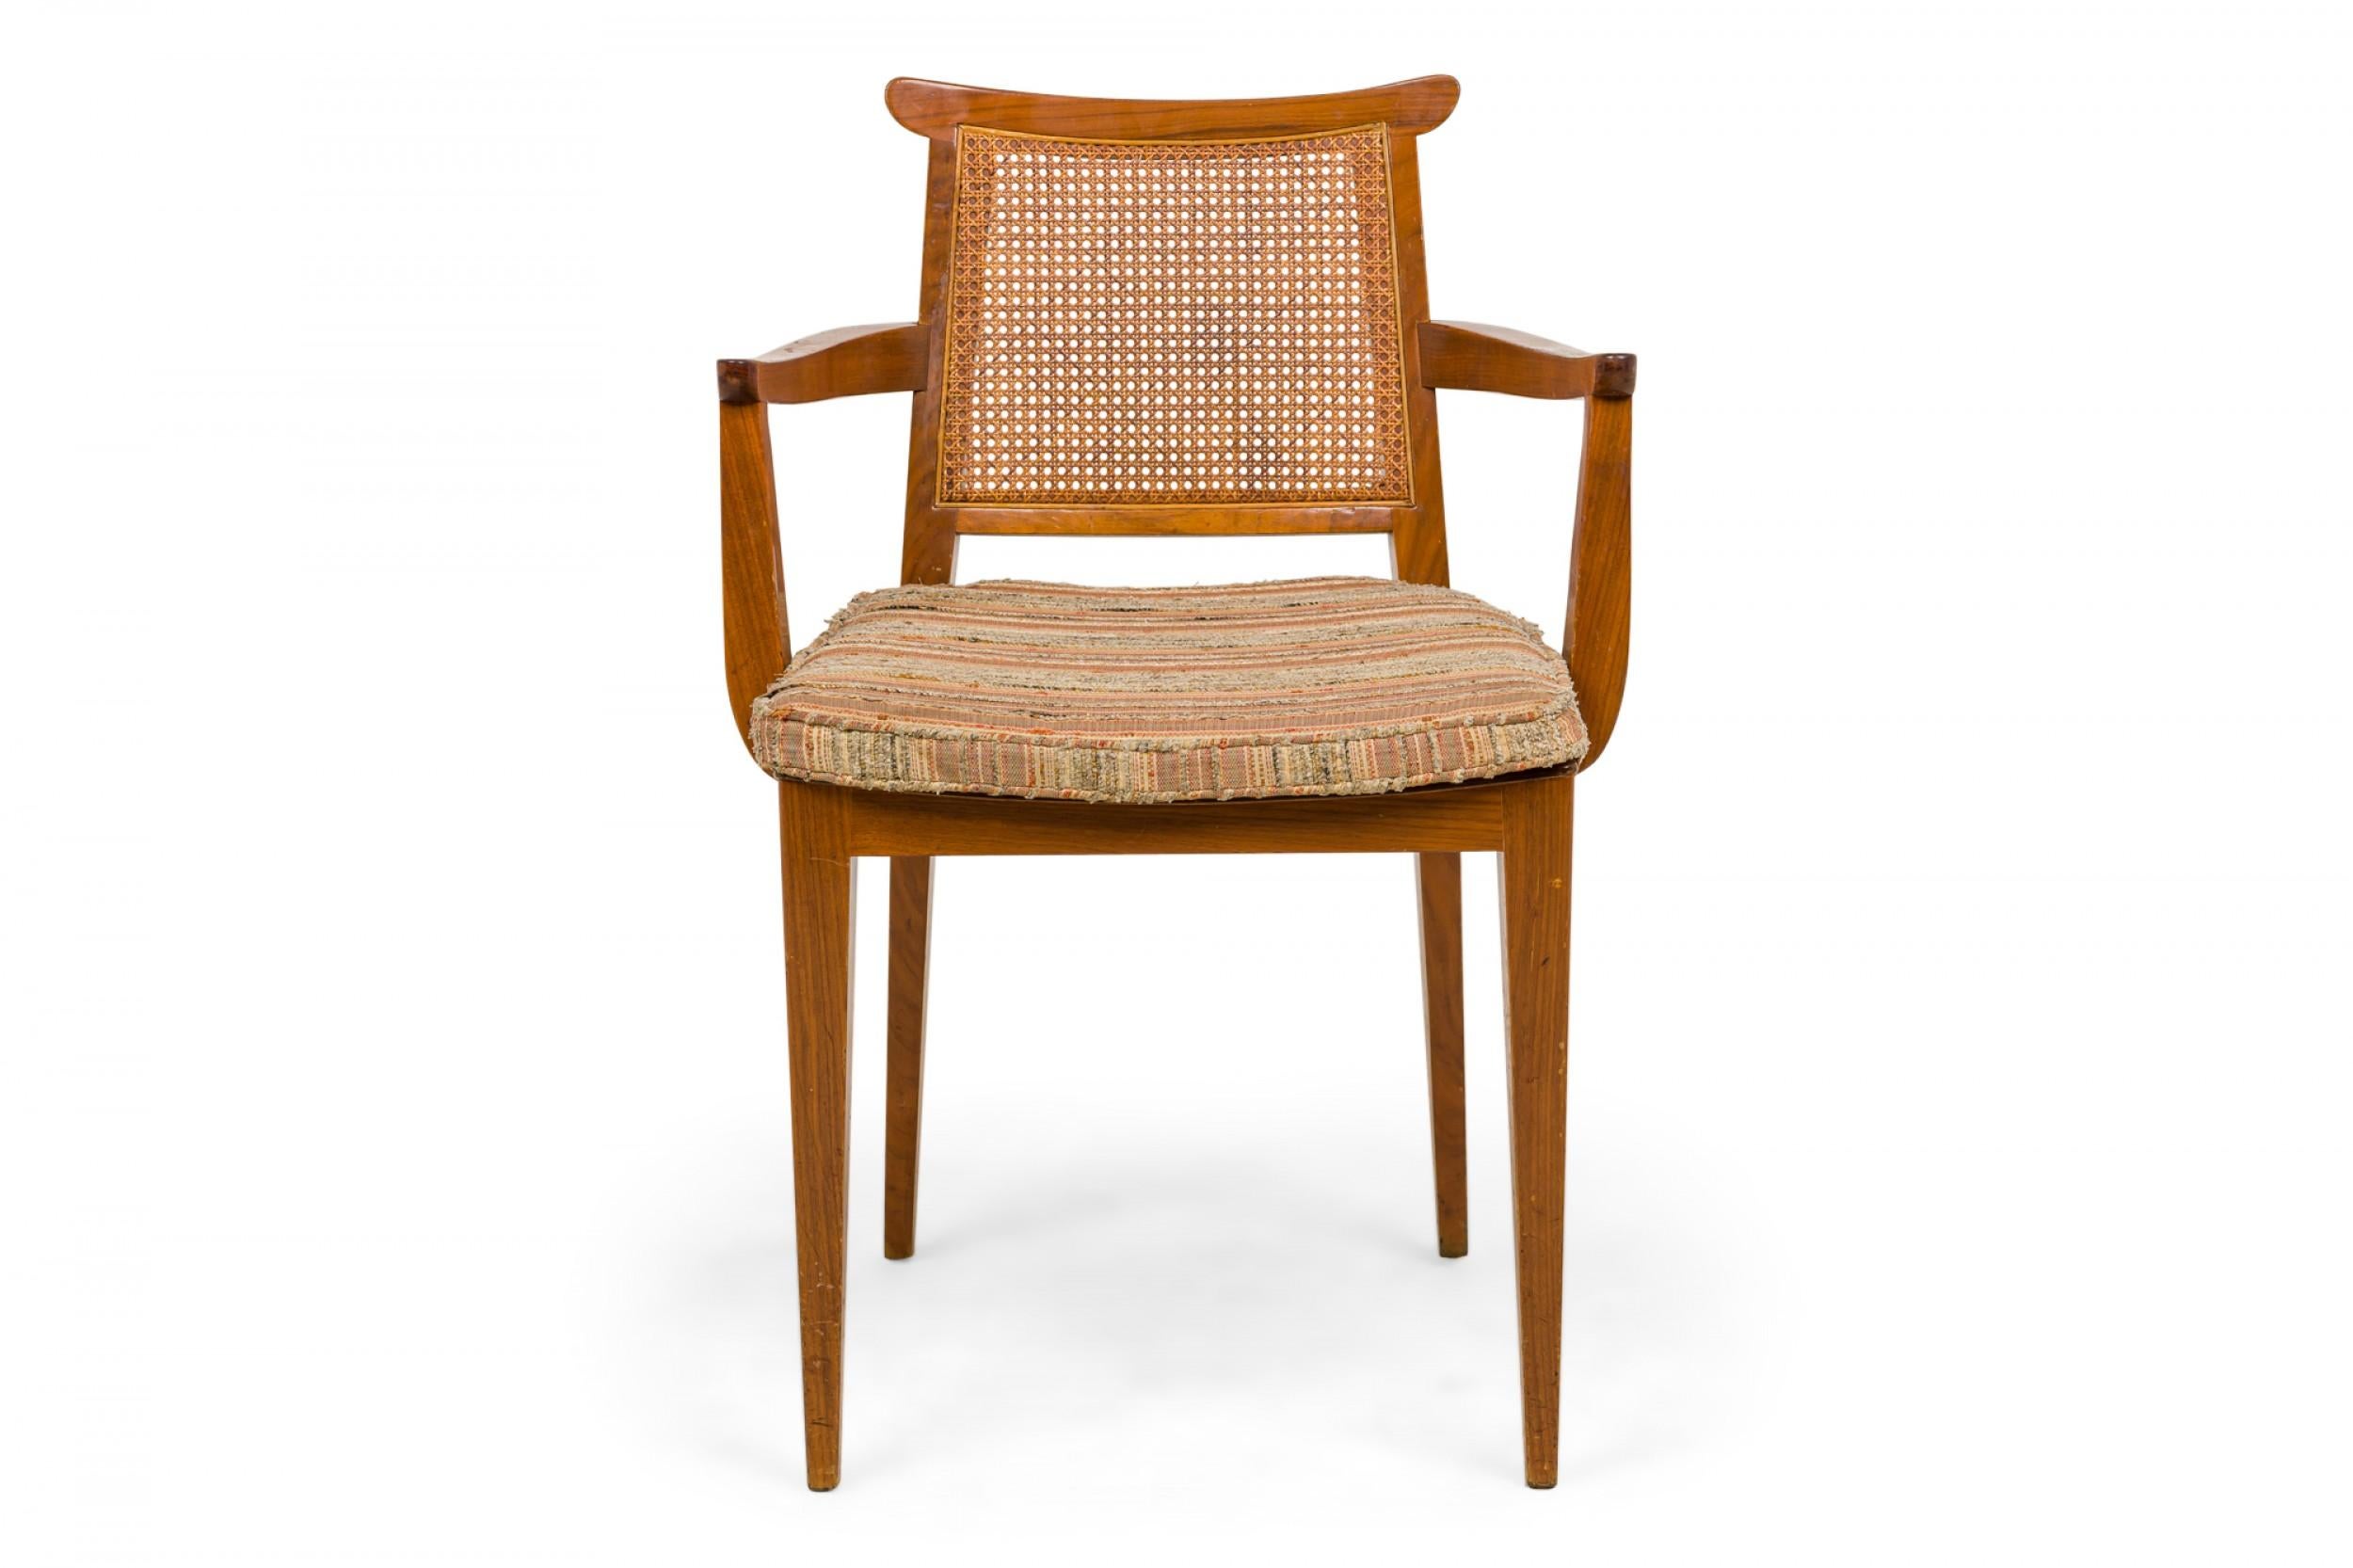 PAIR of American Mid-Century dining armchairs with wooden frames, woven striped beige, gray, and orange linen upholstered seats, and caned backs. (EDWARD WORMLEY FOR DUNBAR FURNITURE COMPANY)(PRICED AS SET).